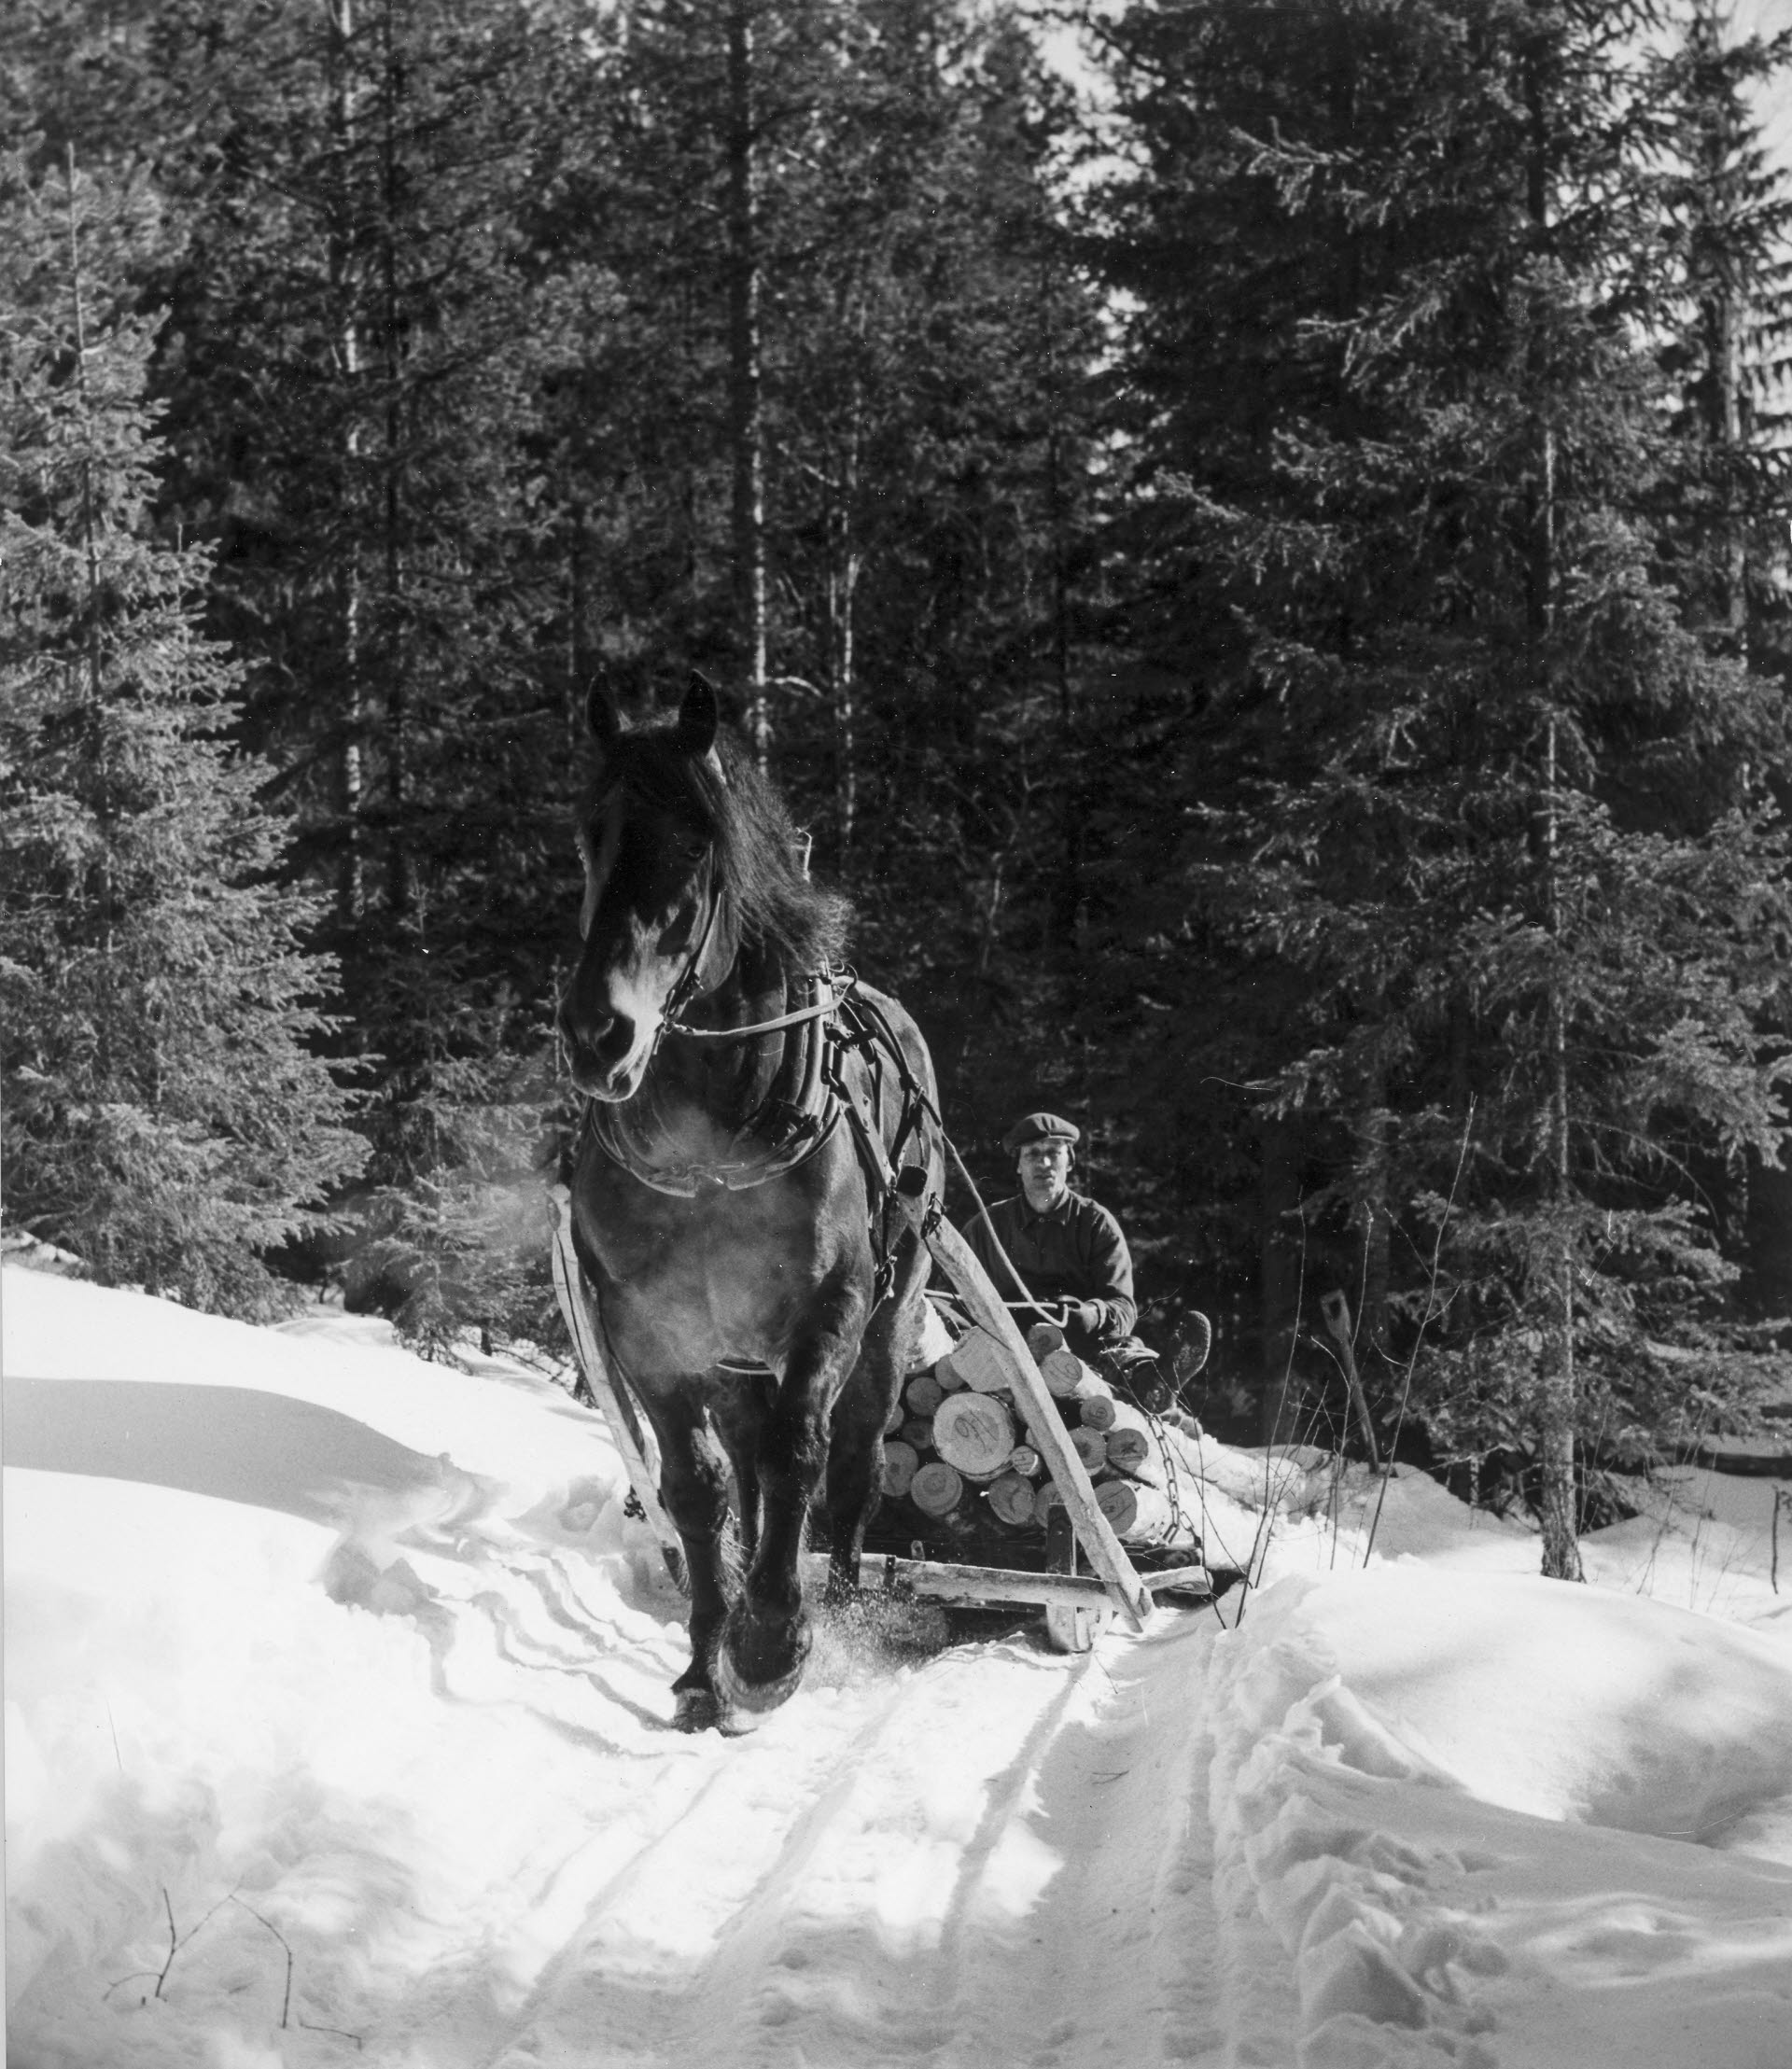 Man driving logs by horse during winterfelling, 1950s.